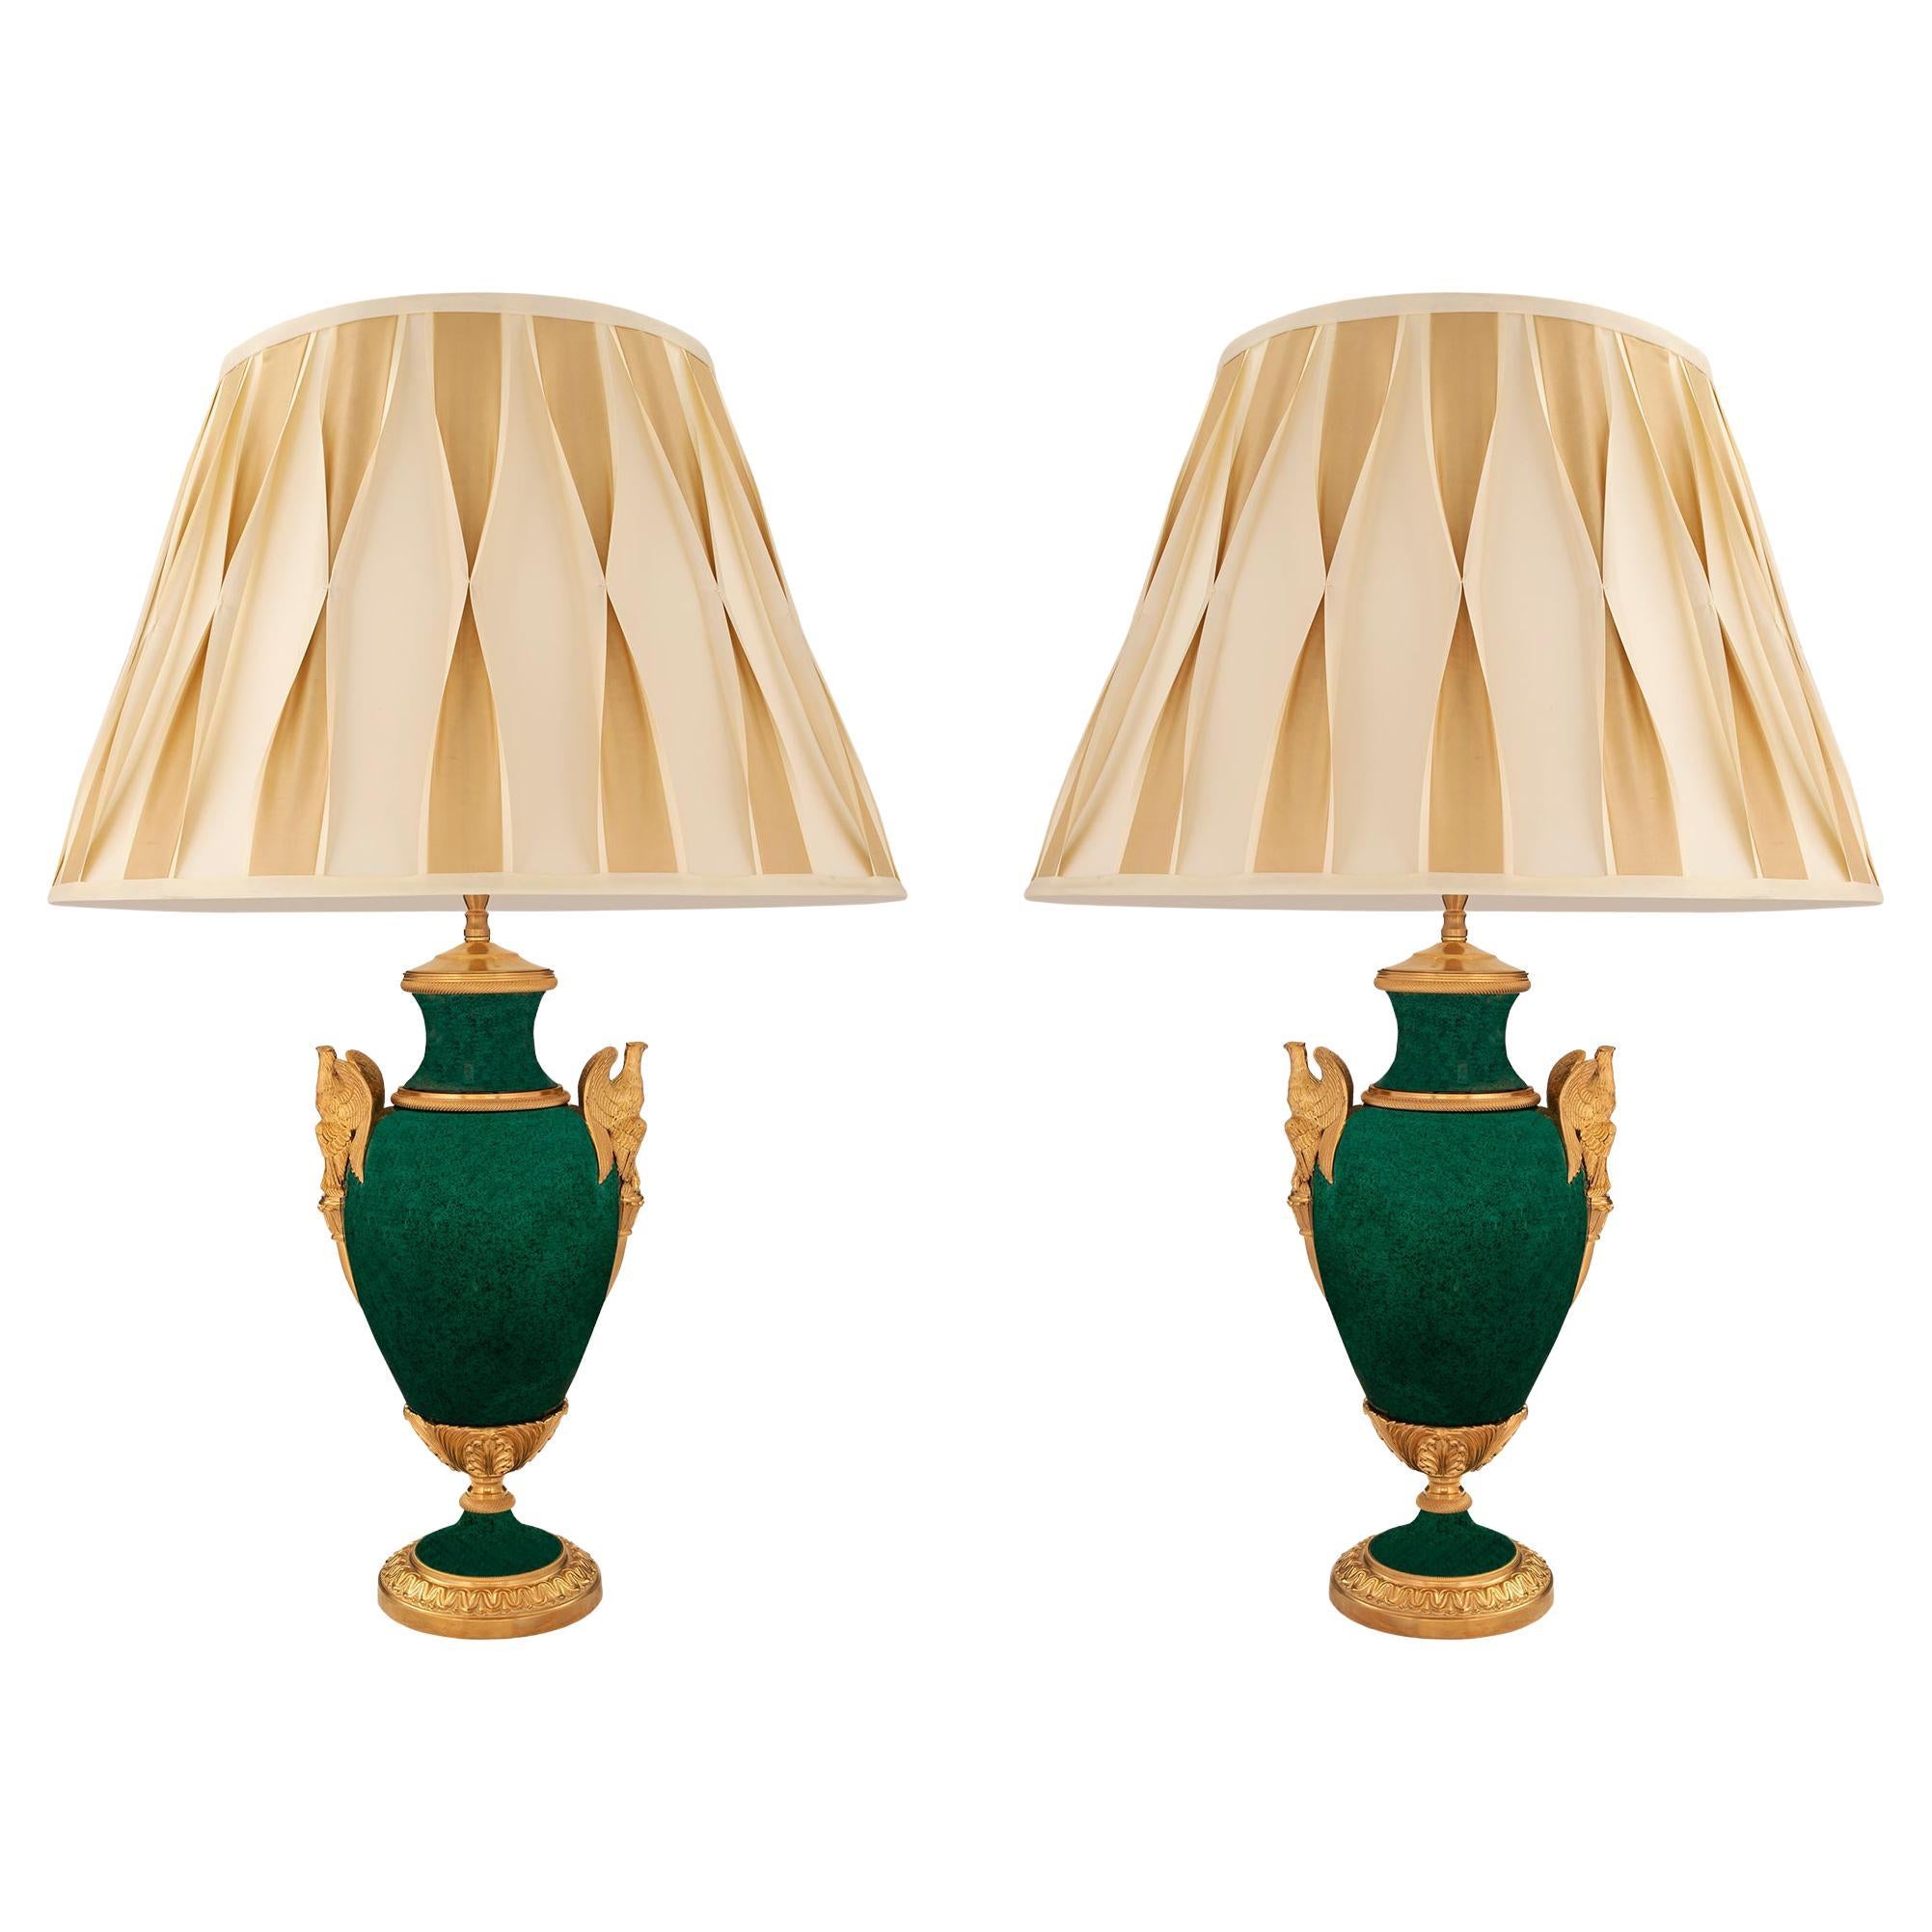 Pair of French 19th Century Empire Style Porcelain and Ormolu Lamps